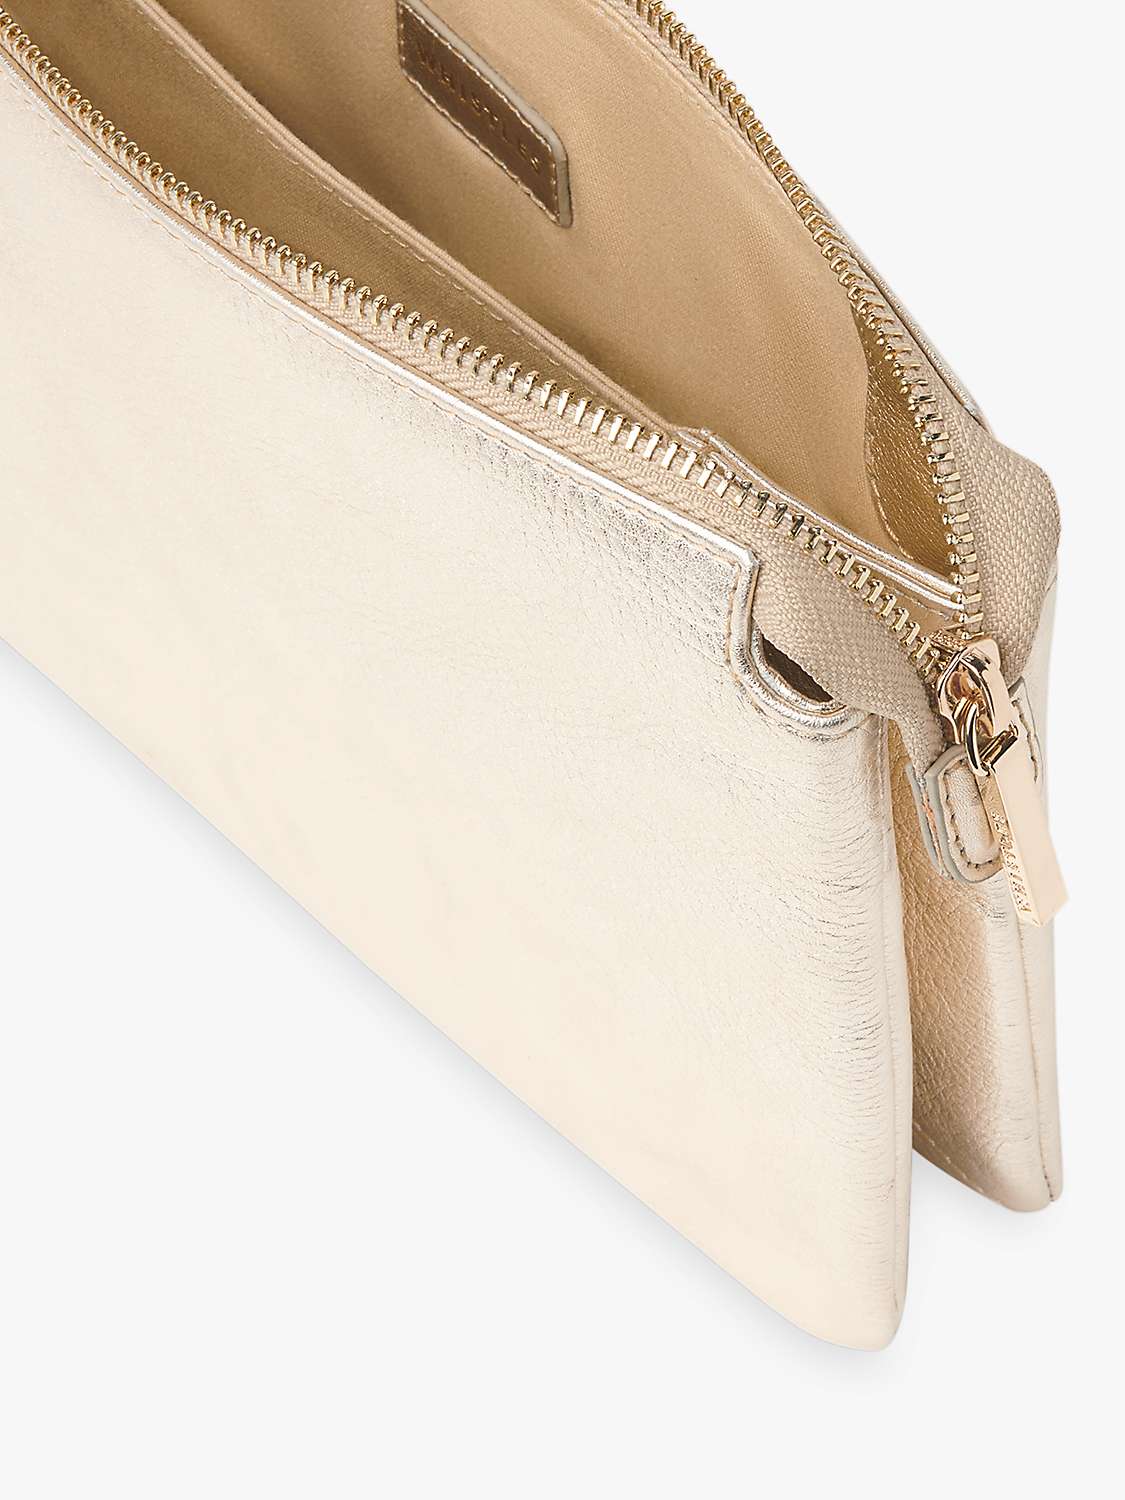 Buy Whistles Elita Leather Double Pouch Clutch Bag Online at johnlewis.com